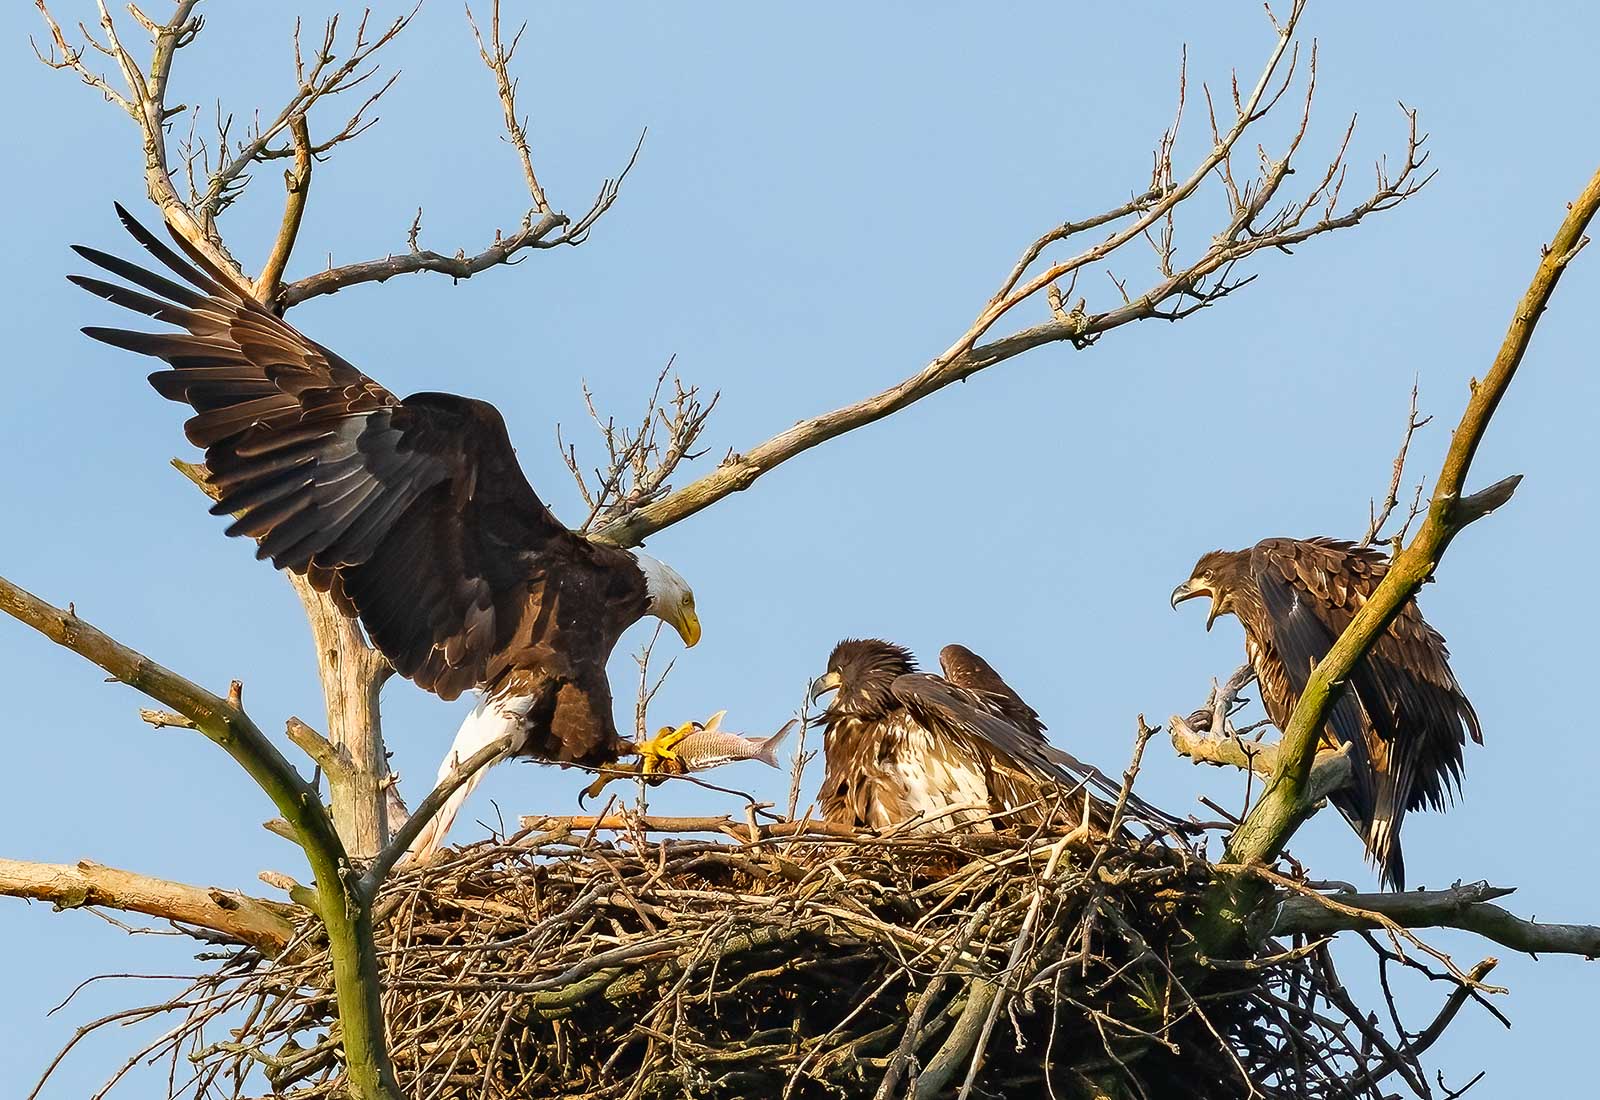 Eagles deliver fish to the eaglets in the nest